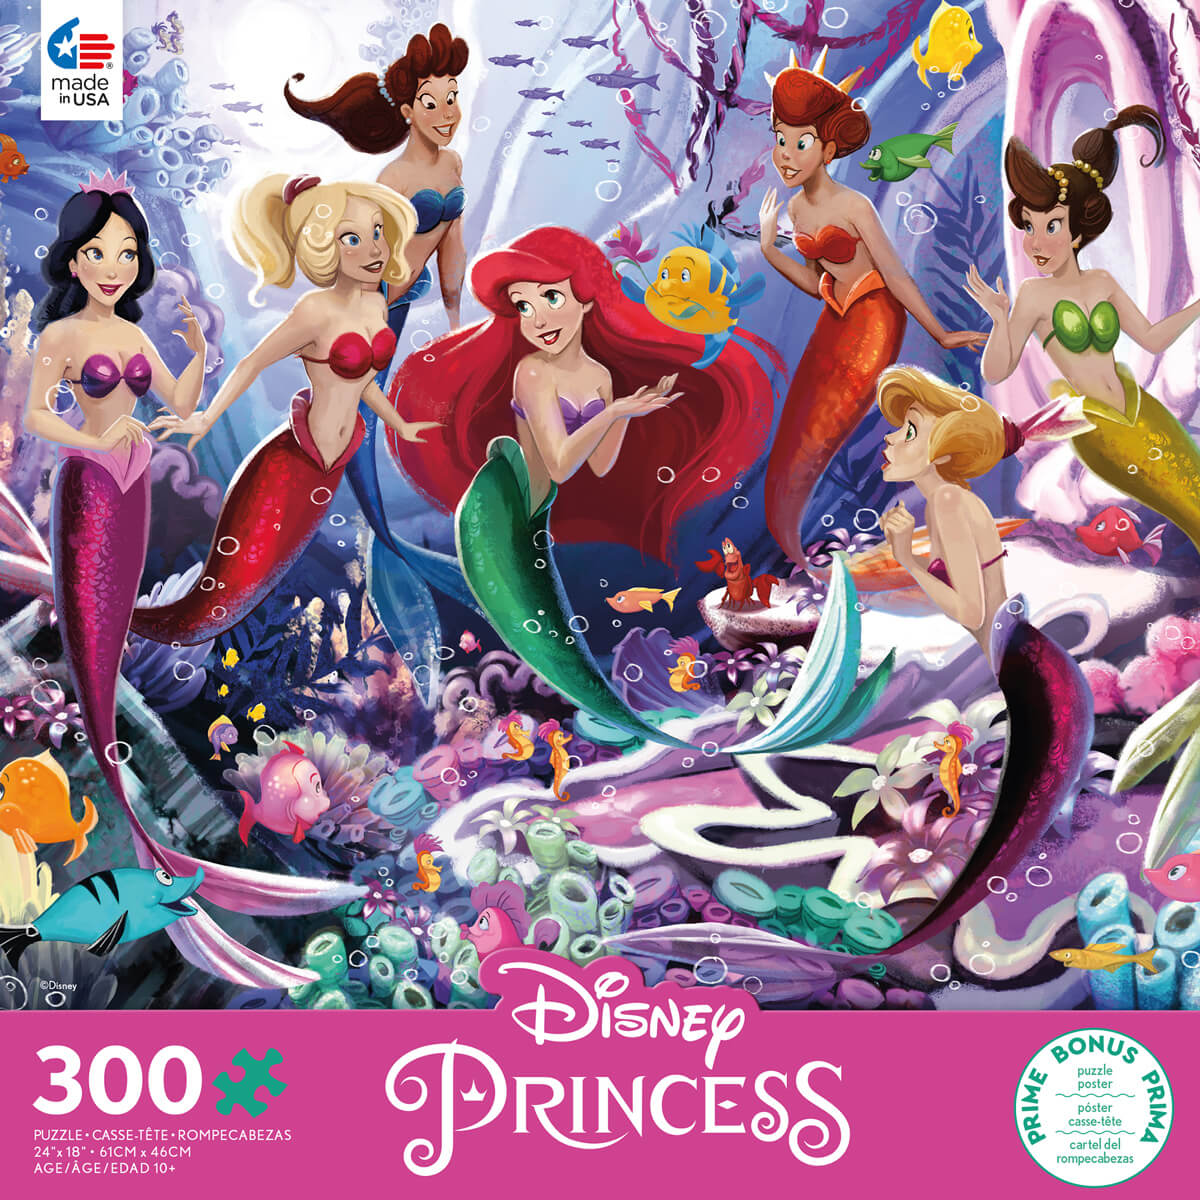 Ceaco Disney Princess Ariel and Her Sisters 300 Piece Jigsaw Puzzle